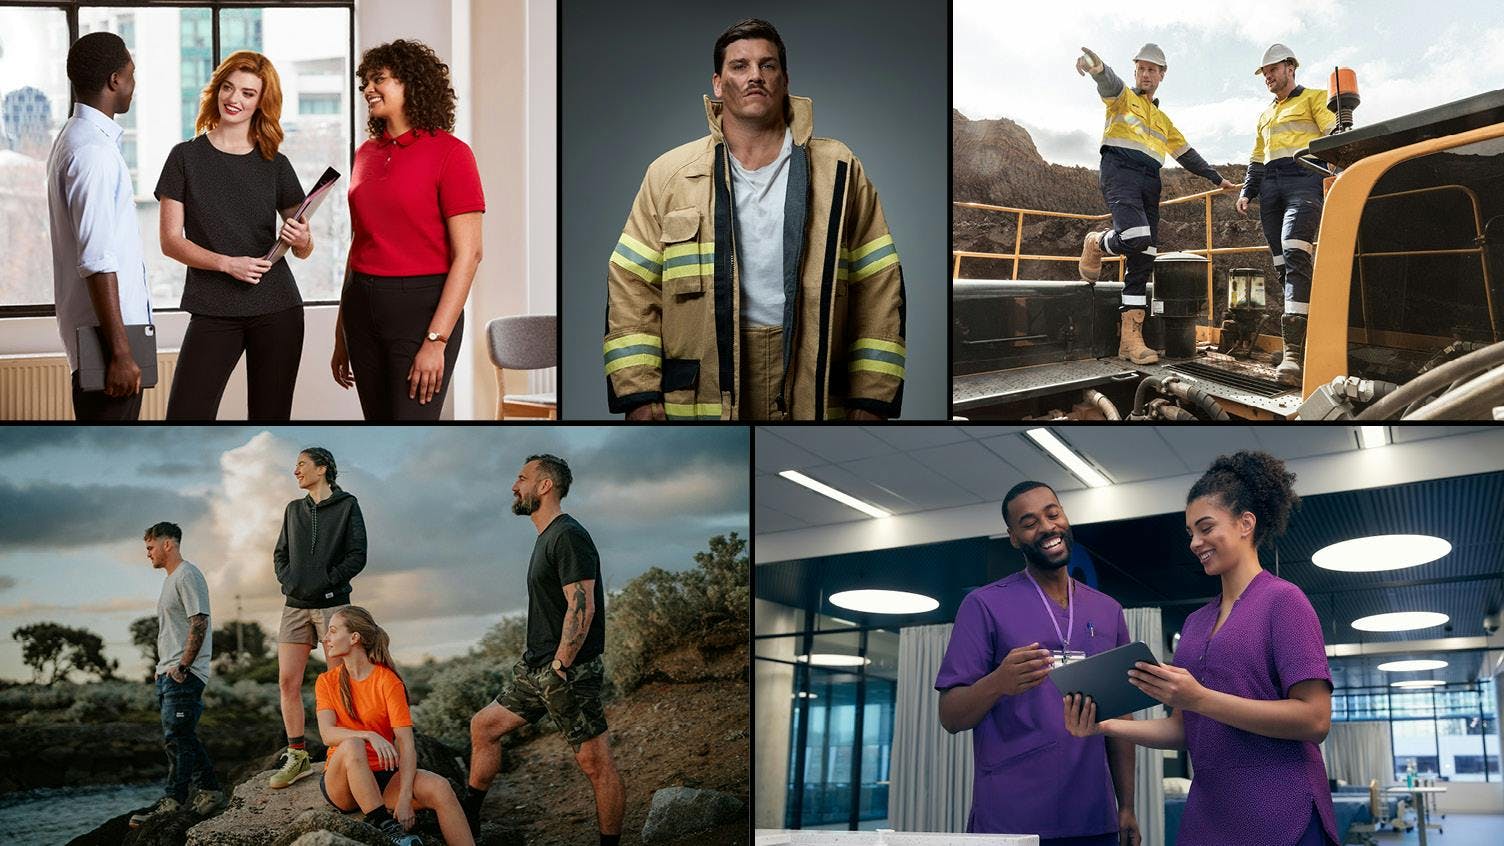 Campaign images of Workwear Group brands